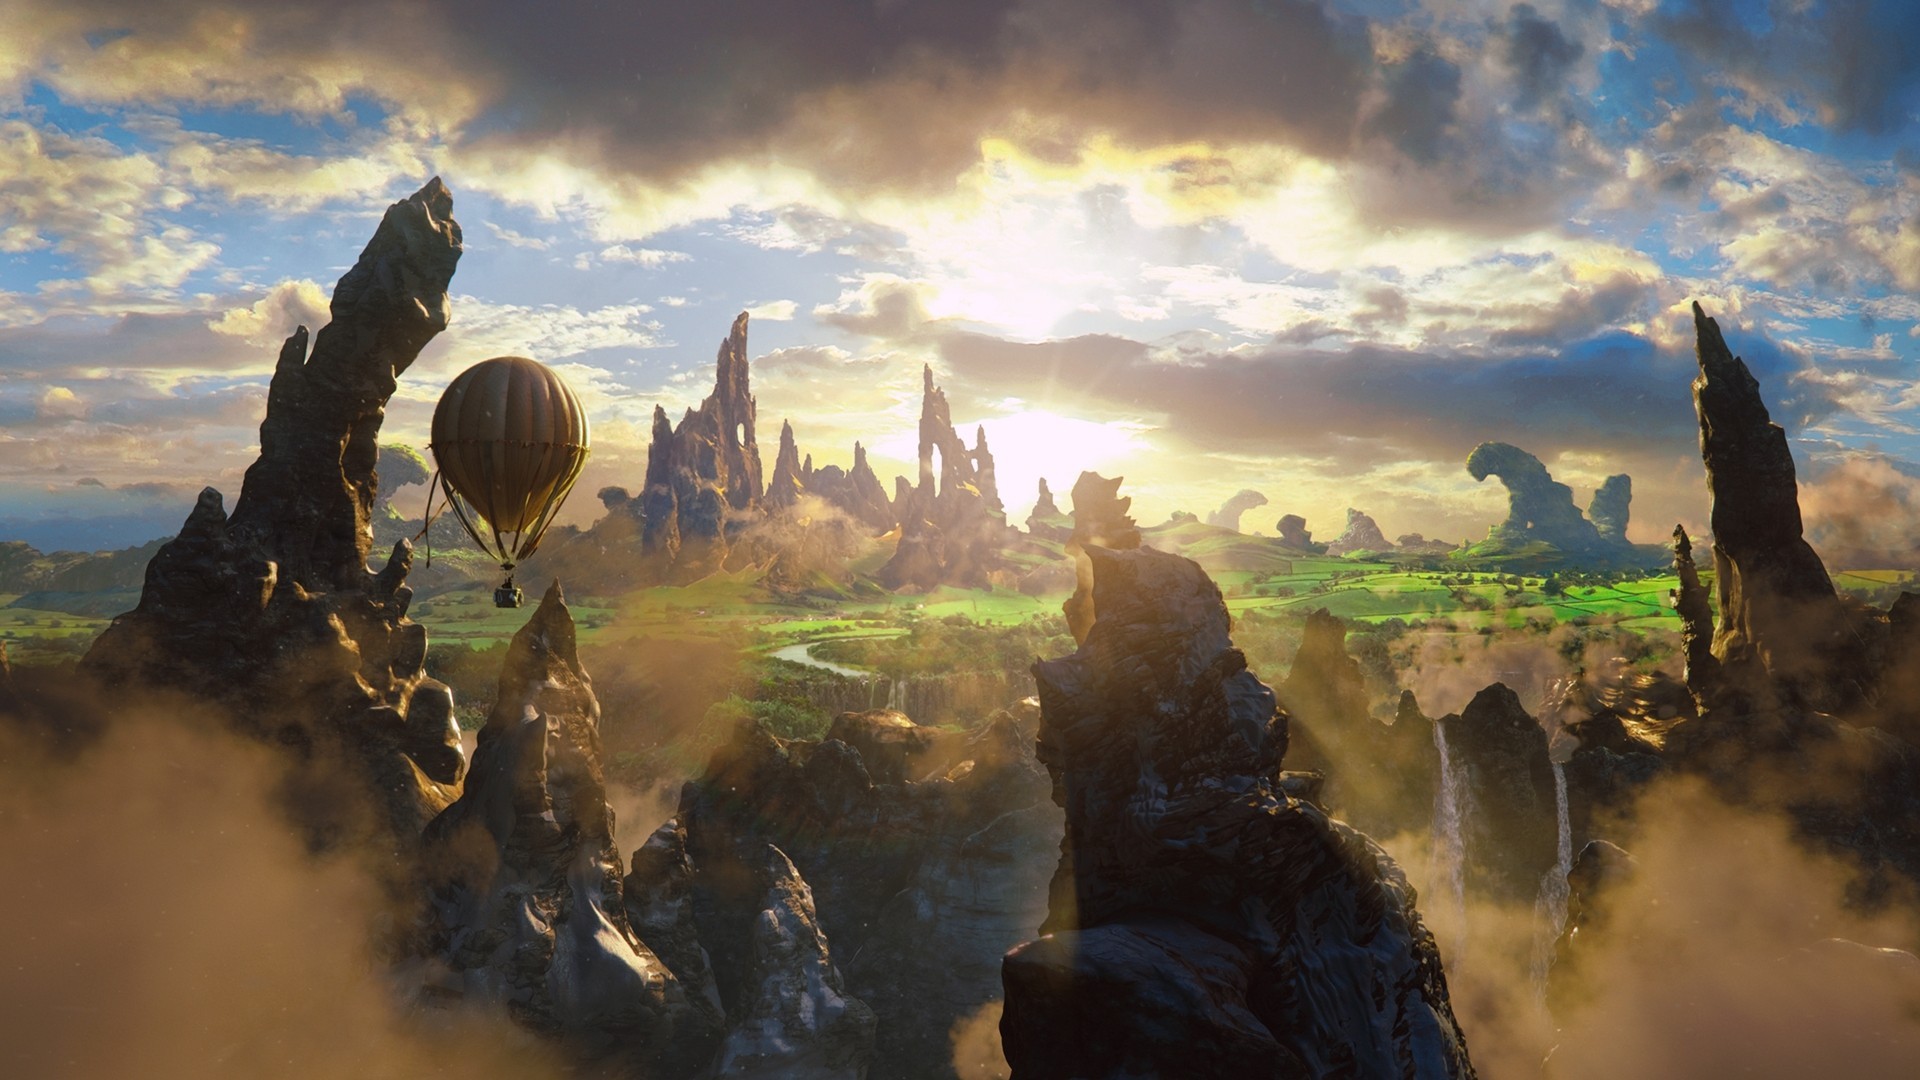 General 1920x1080 fantasy art hot air balloons digital art Oz the Great and Powerful rock formation sunlight landscape movies